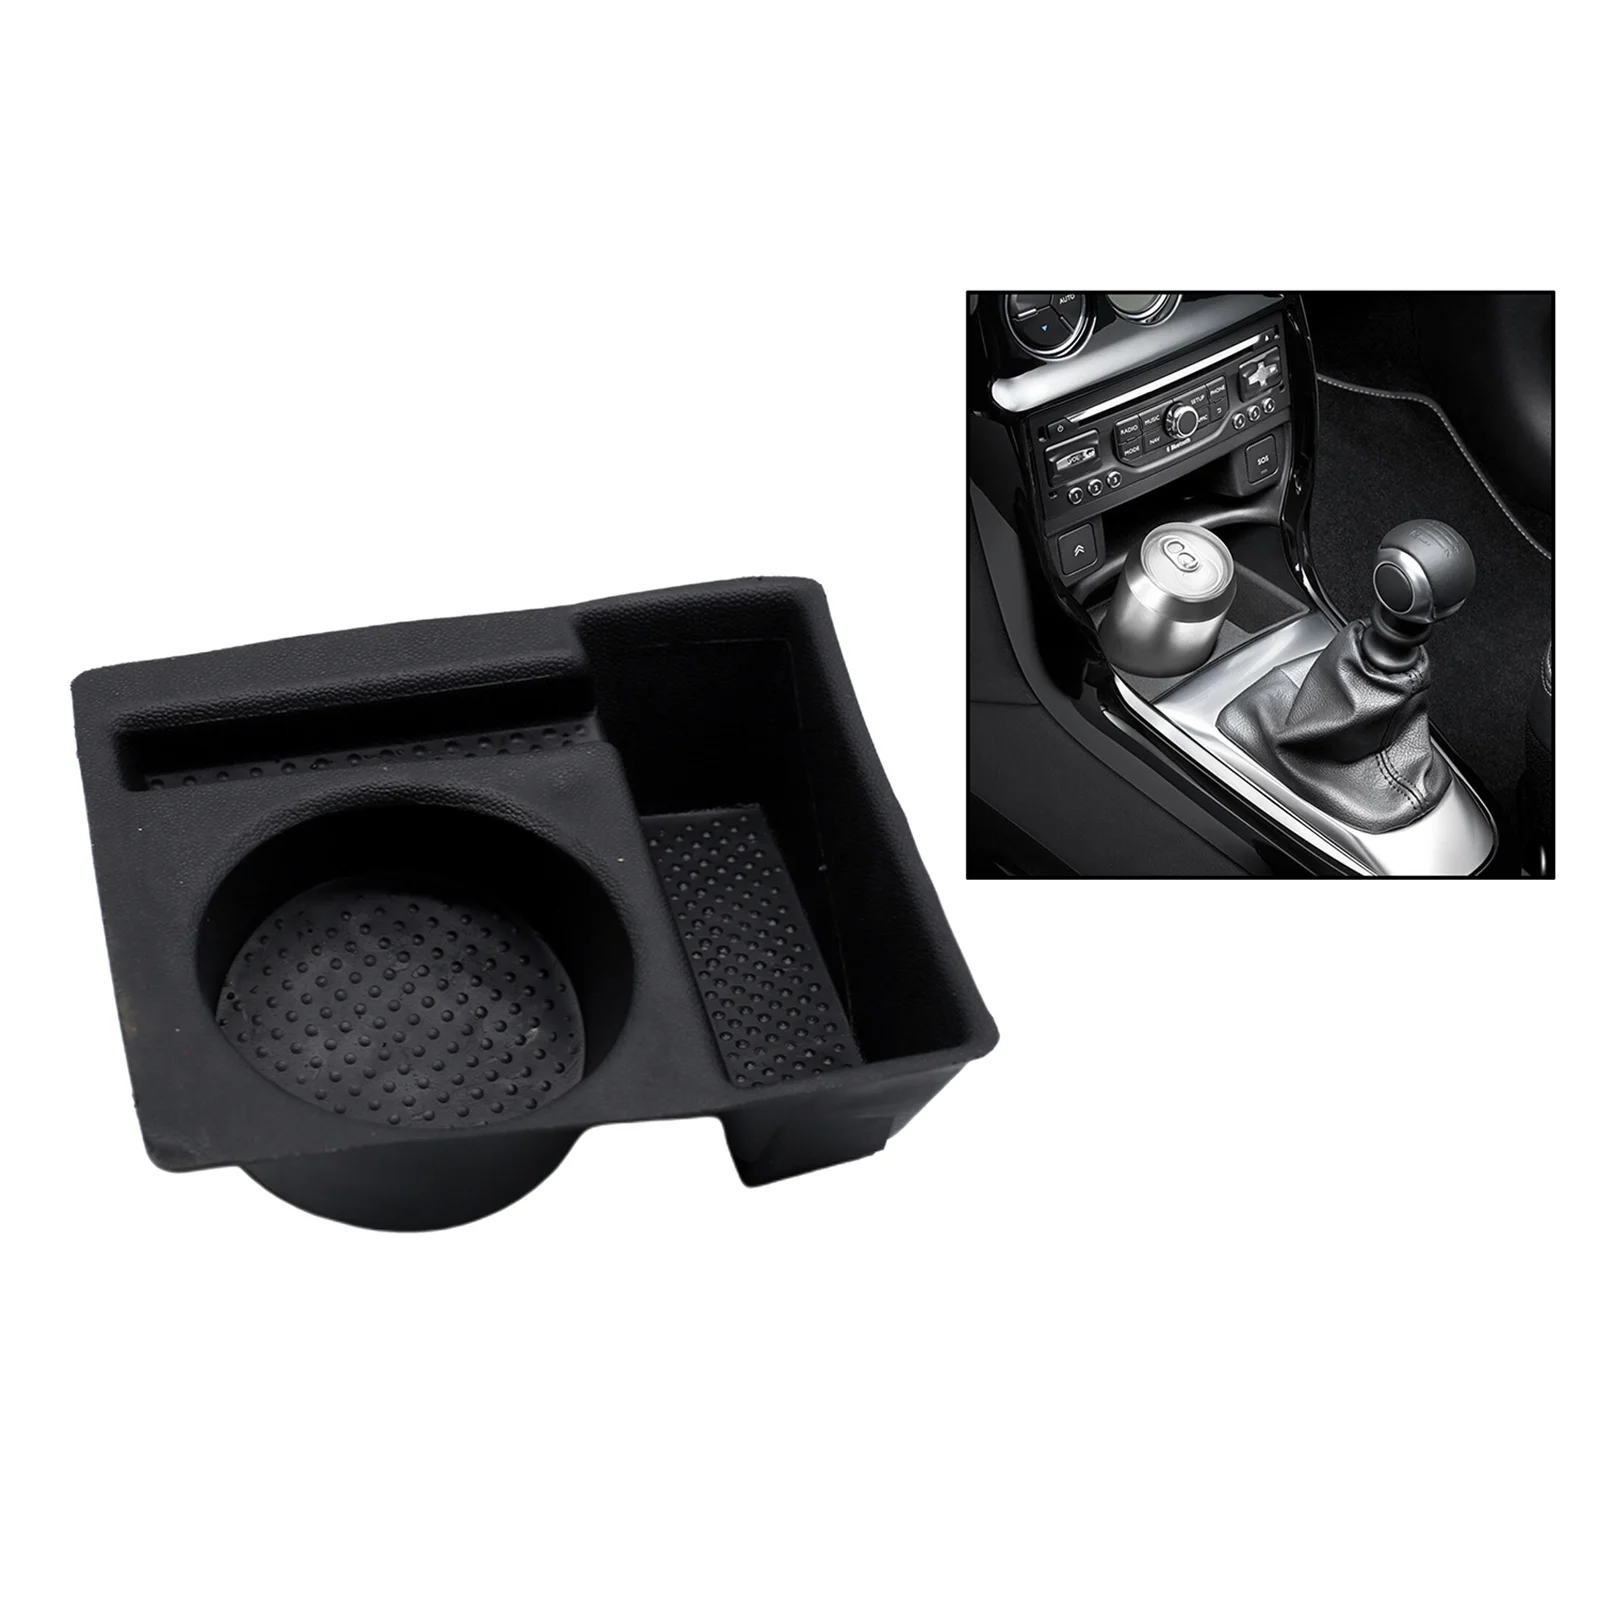 9425E4 Cup Holder Vehicle Tray Organizer Replace Fits Citroen DS3 Beverage